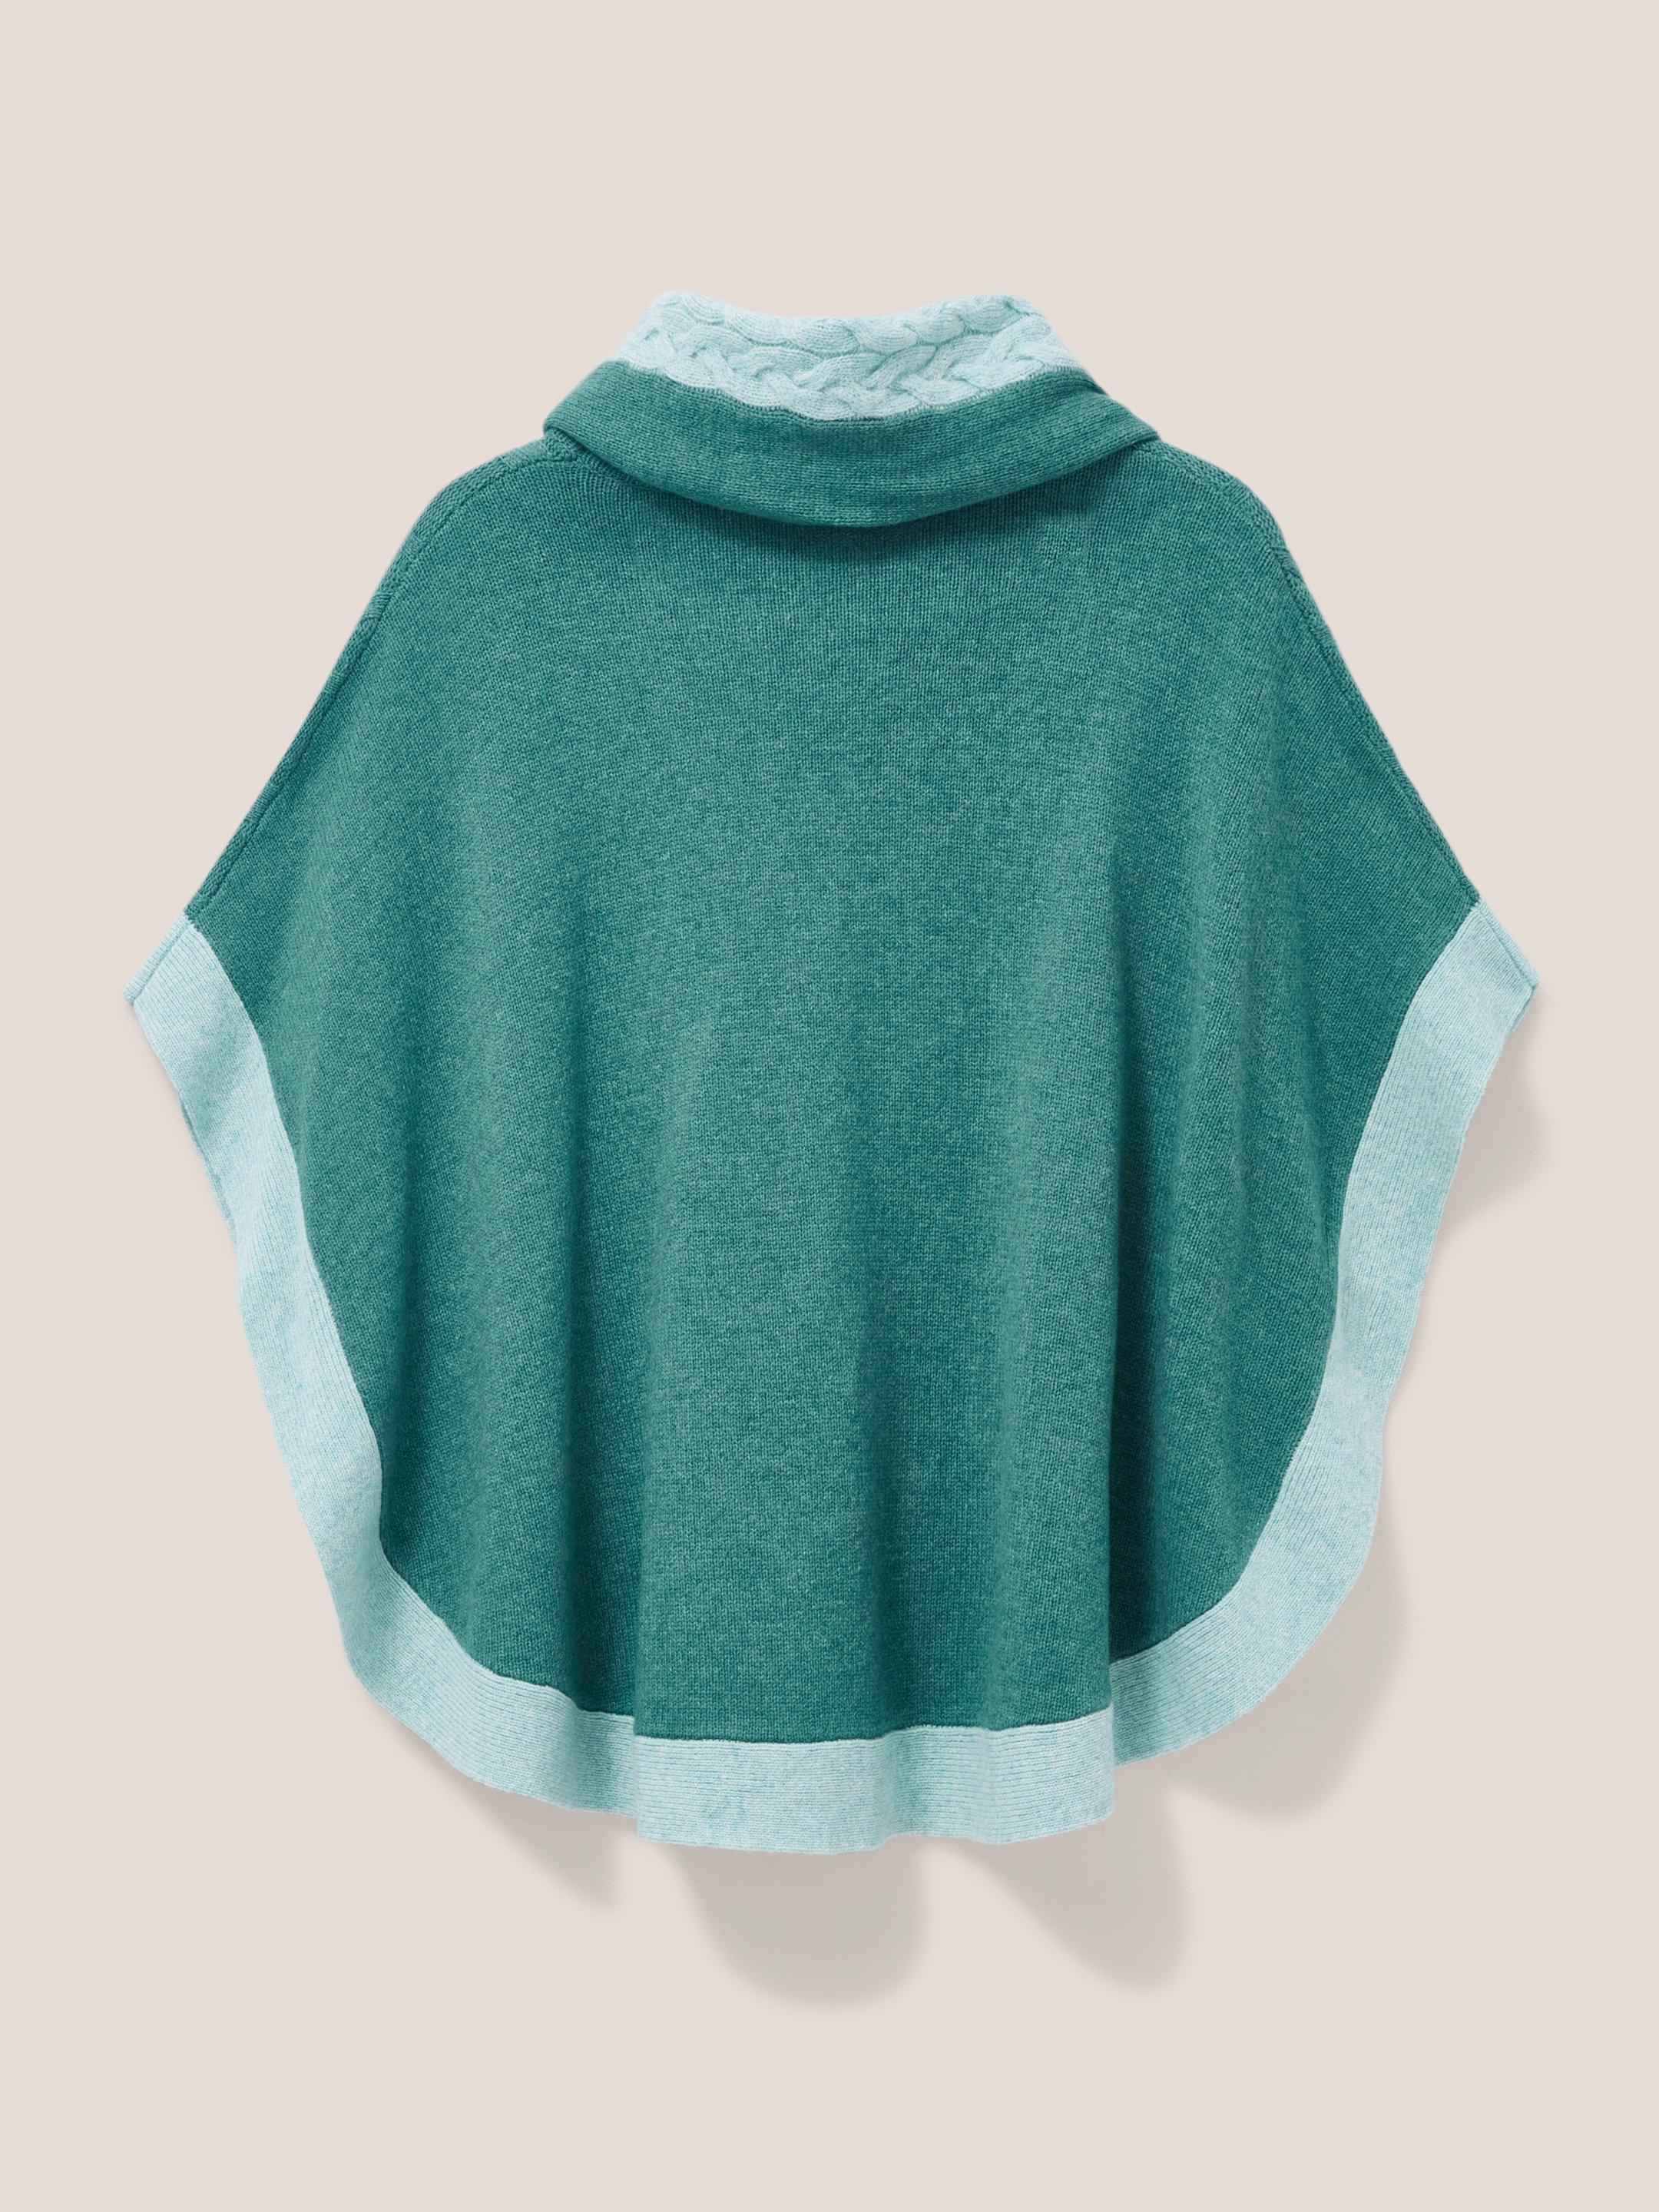 Fern Knitted Casual Poncho in MID TEAL - FLAT BACK